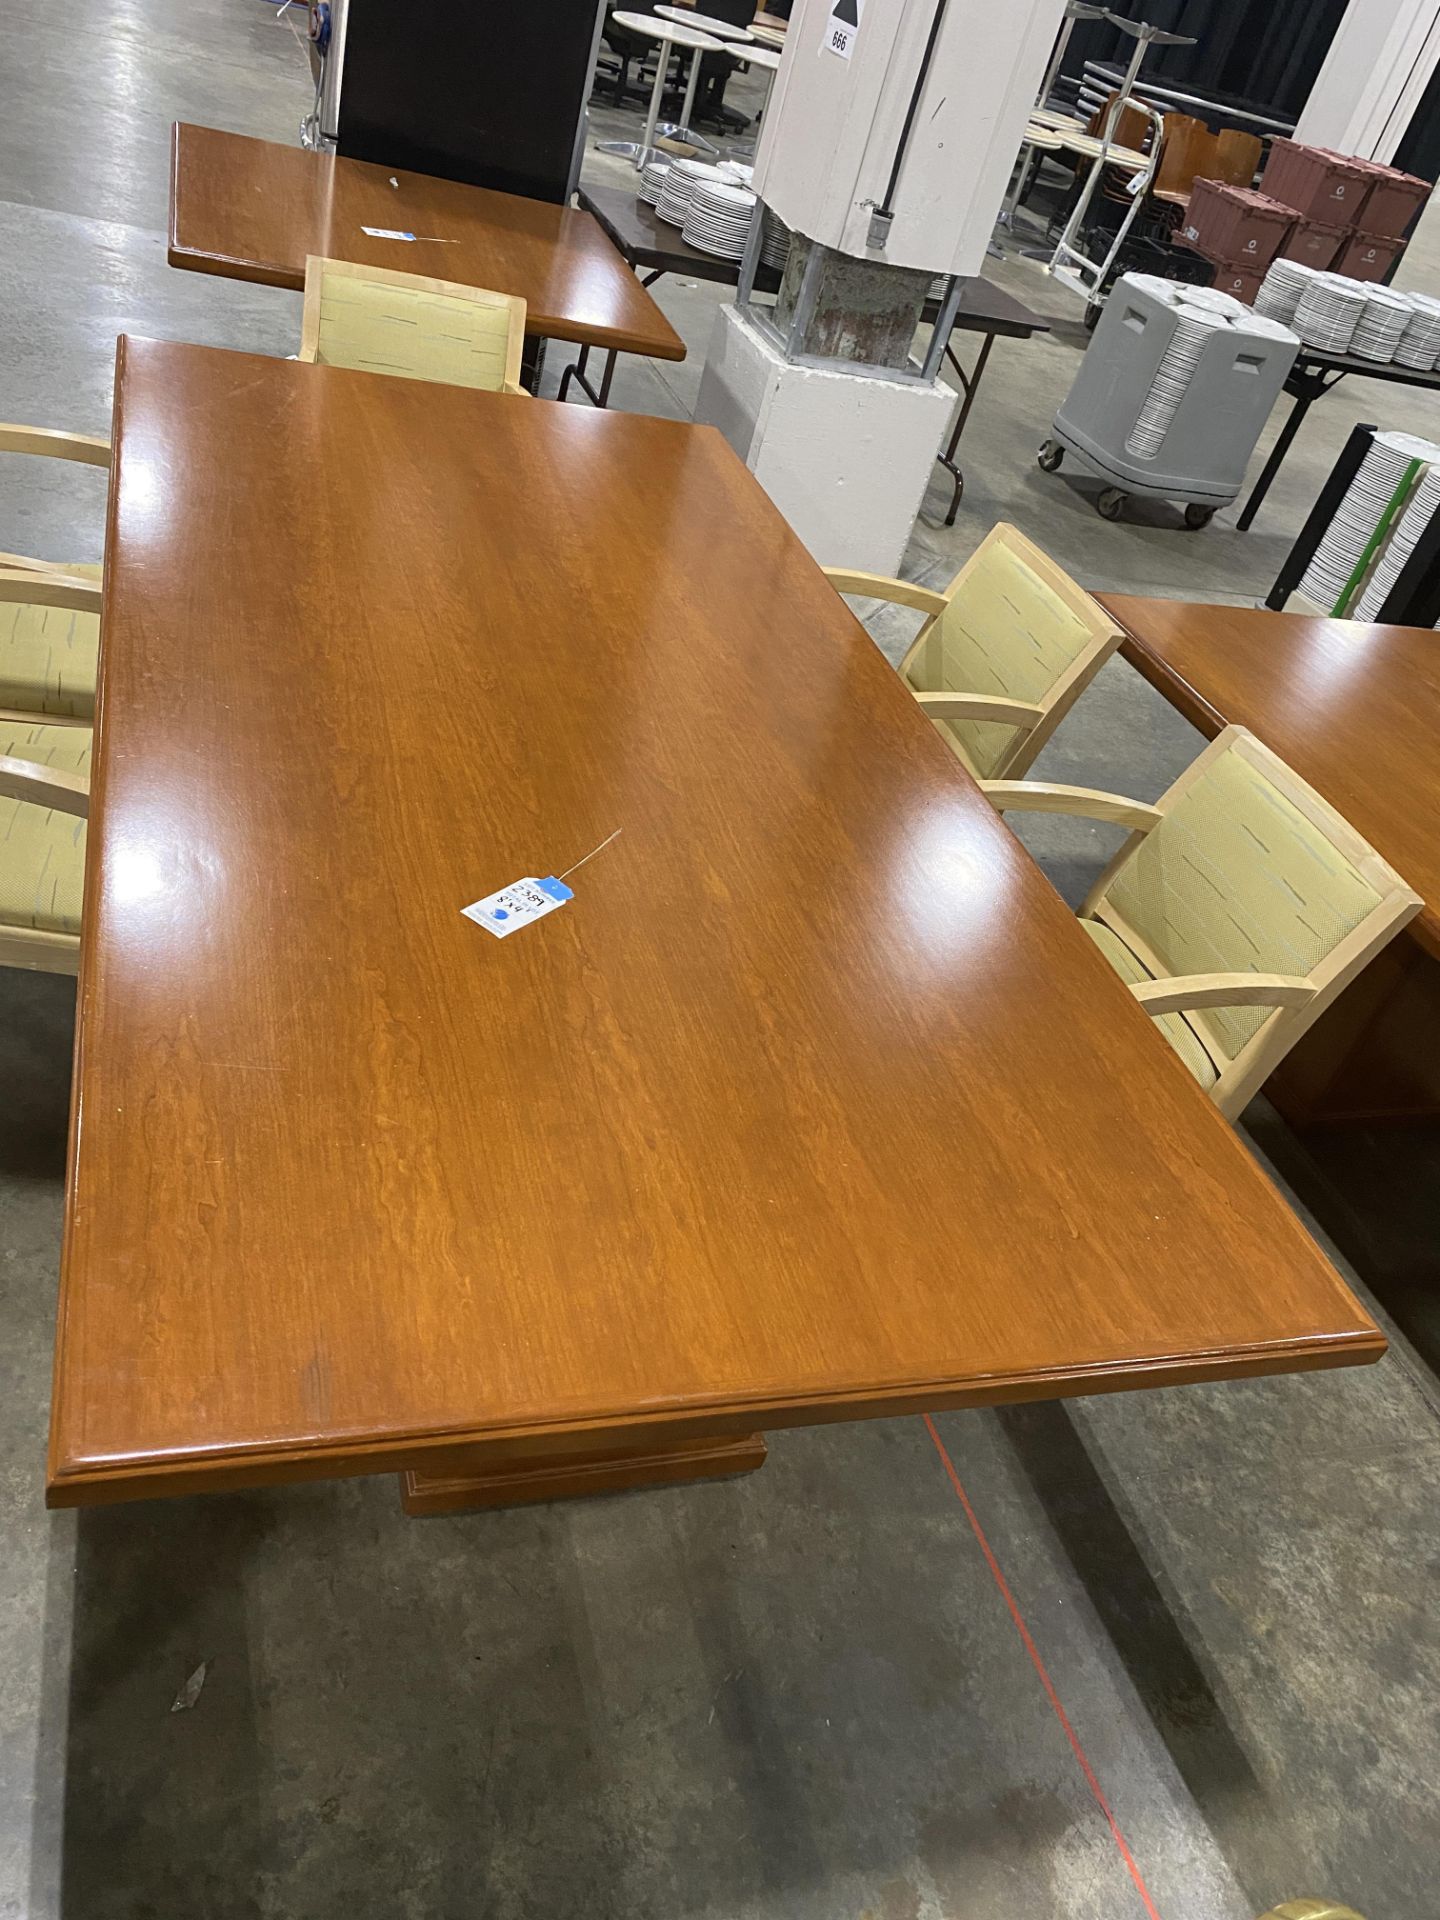 (2 Pieces) c/o: 8' x 4' Double Wood Pedestal Wood Top Conference Table & 4' x 4' Square All Wood - Image 2 of 2